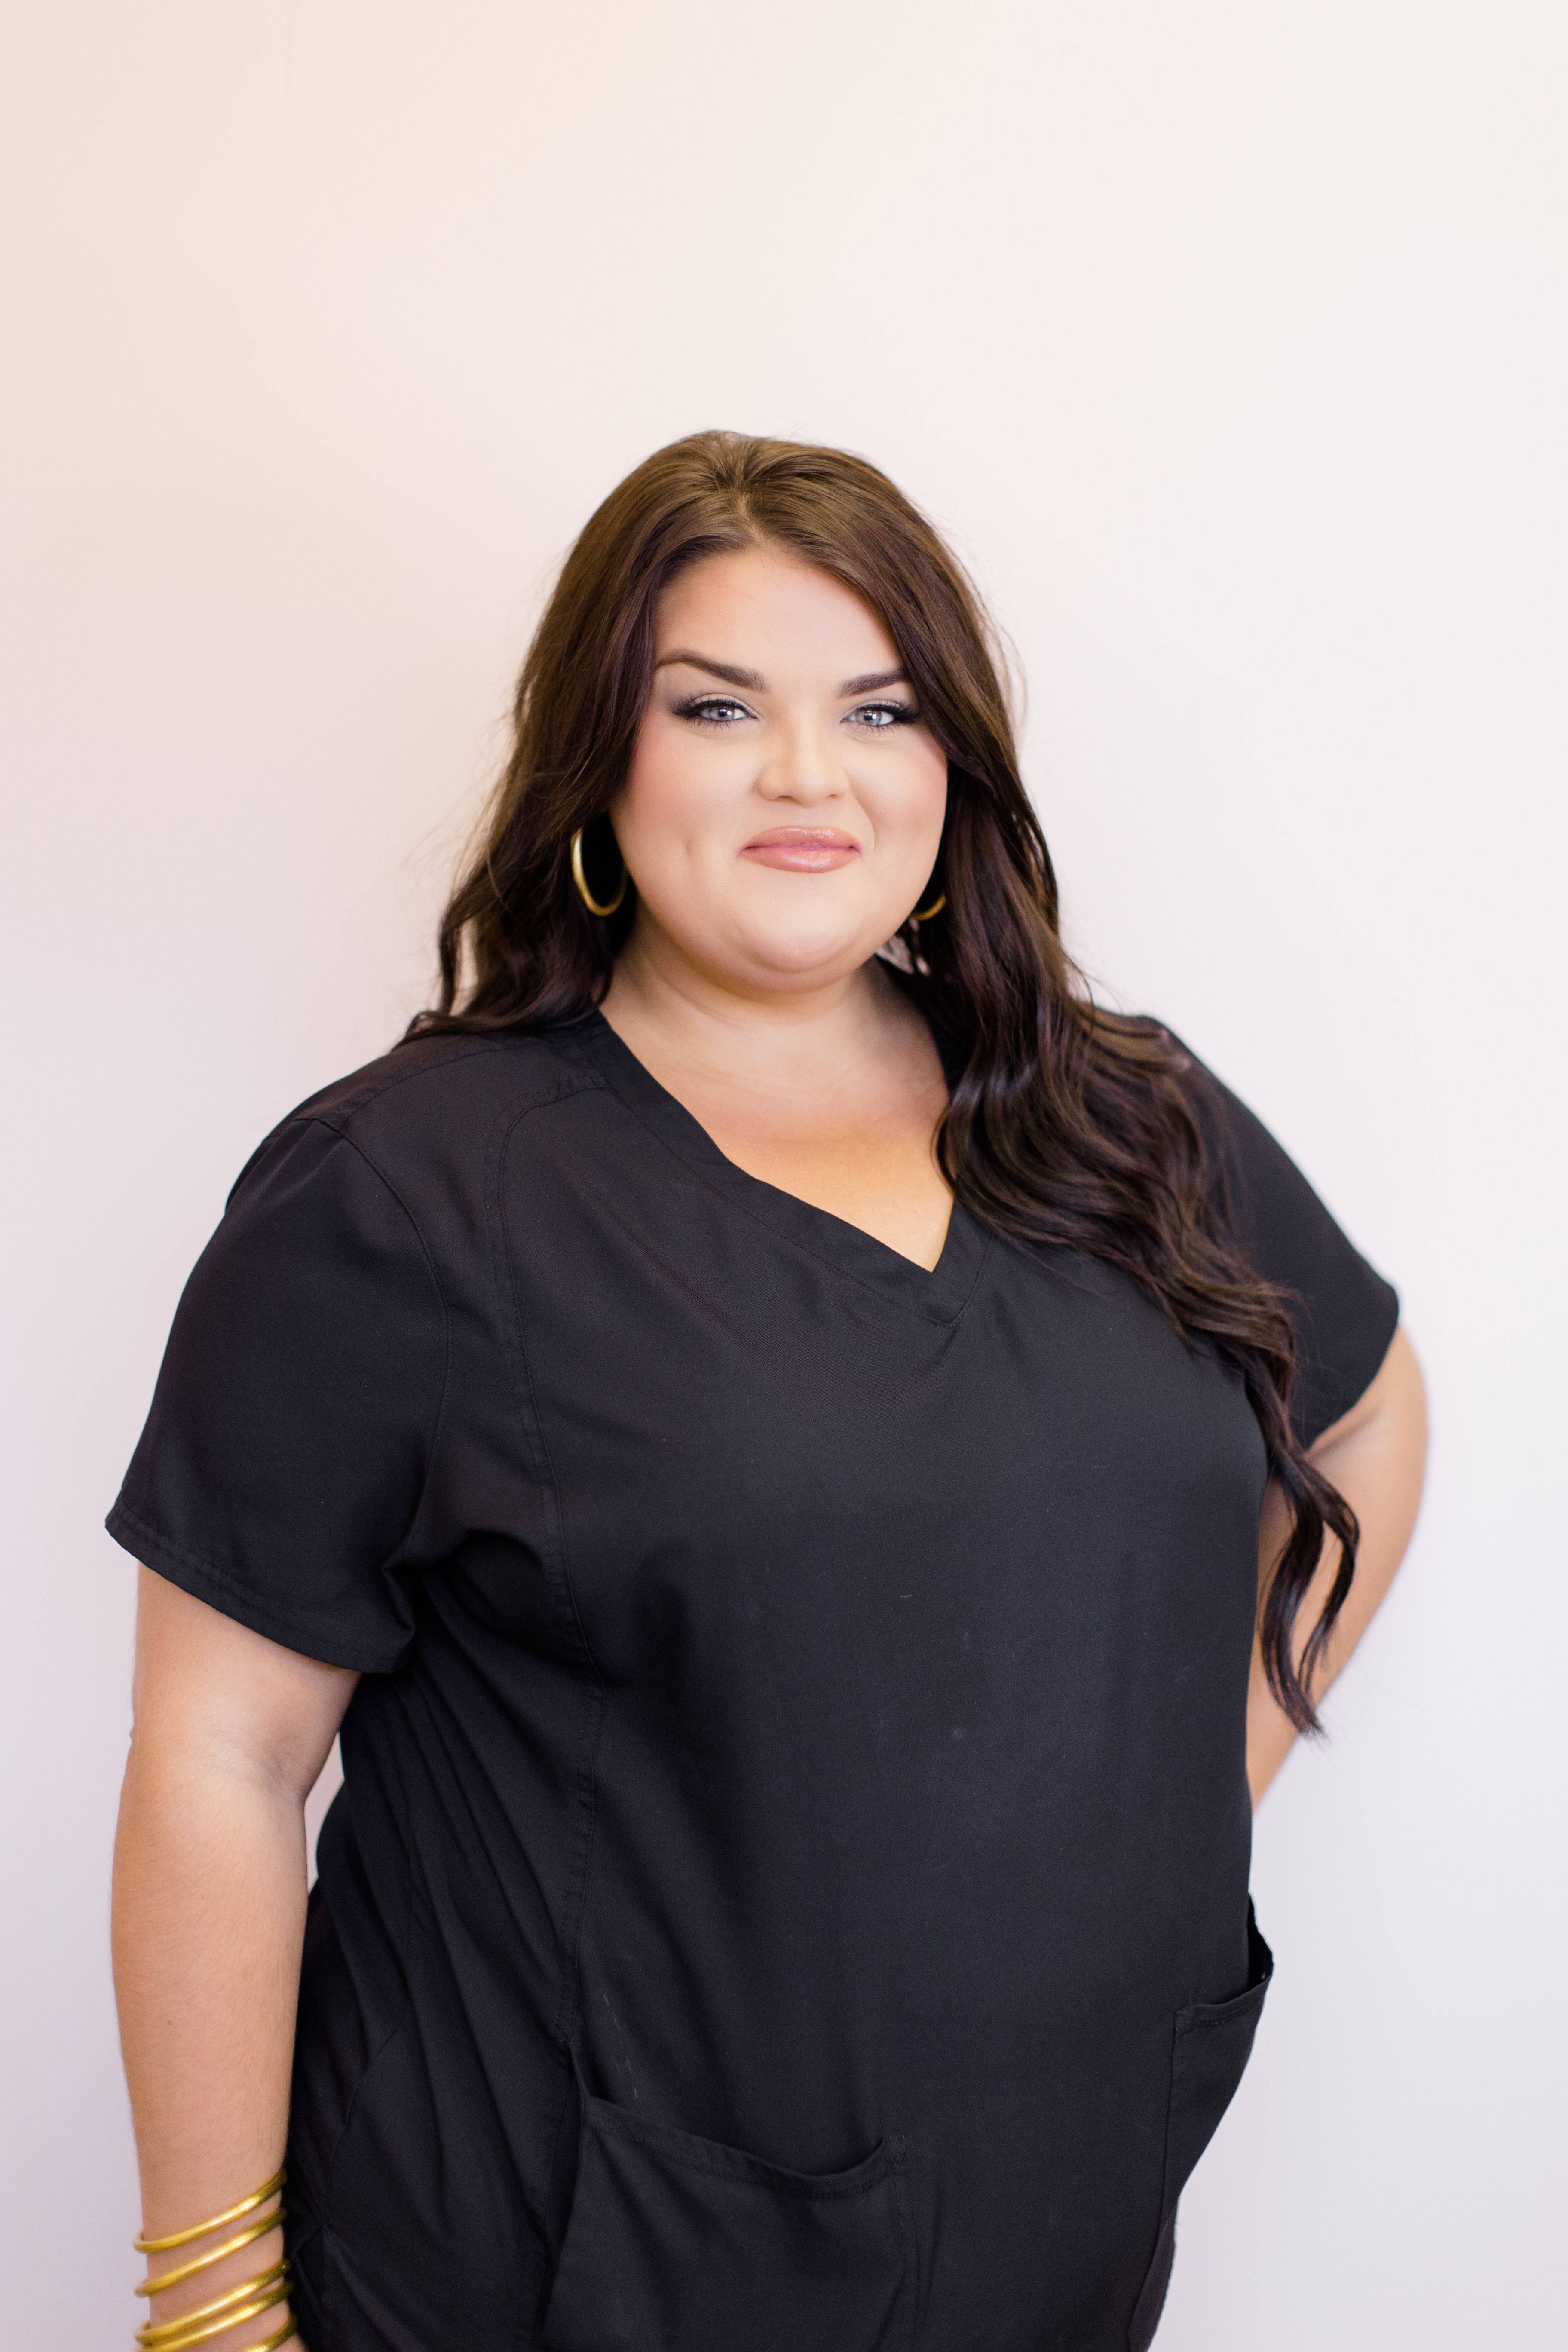 Kalyne Thedford - Licensed Esthetician, Makeup Artist, and Microblading Technician